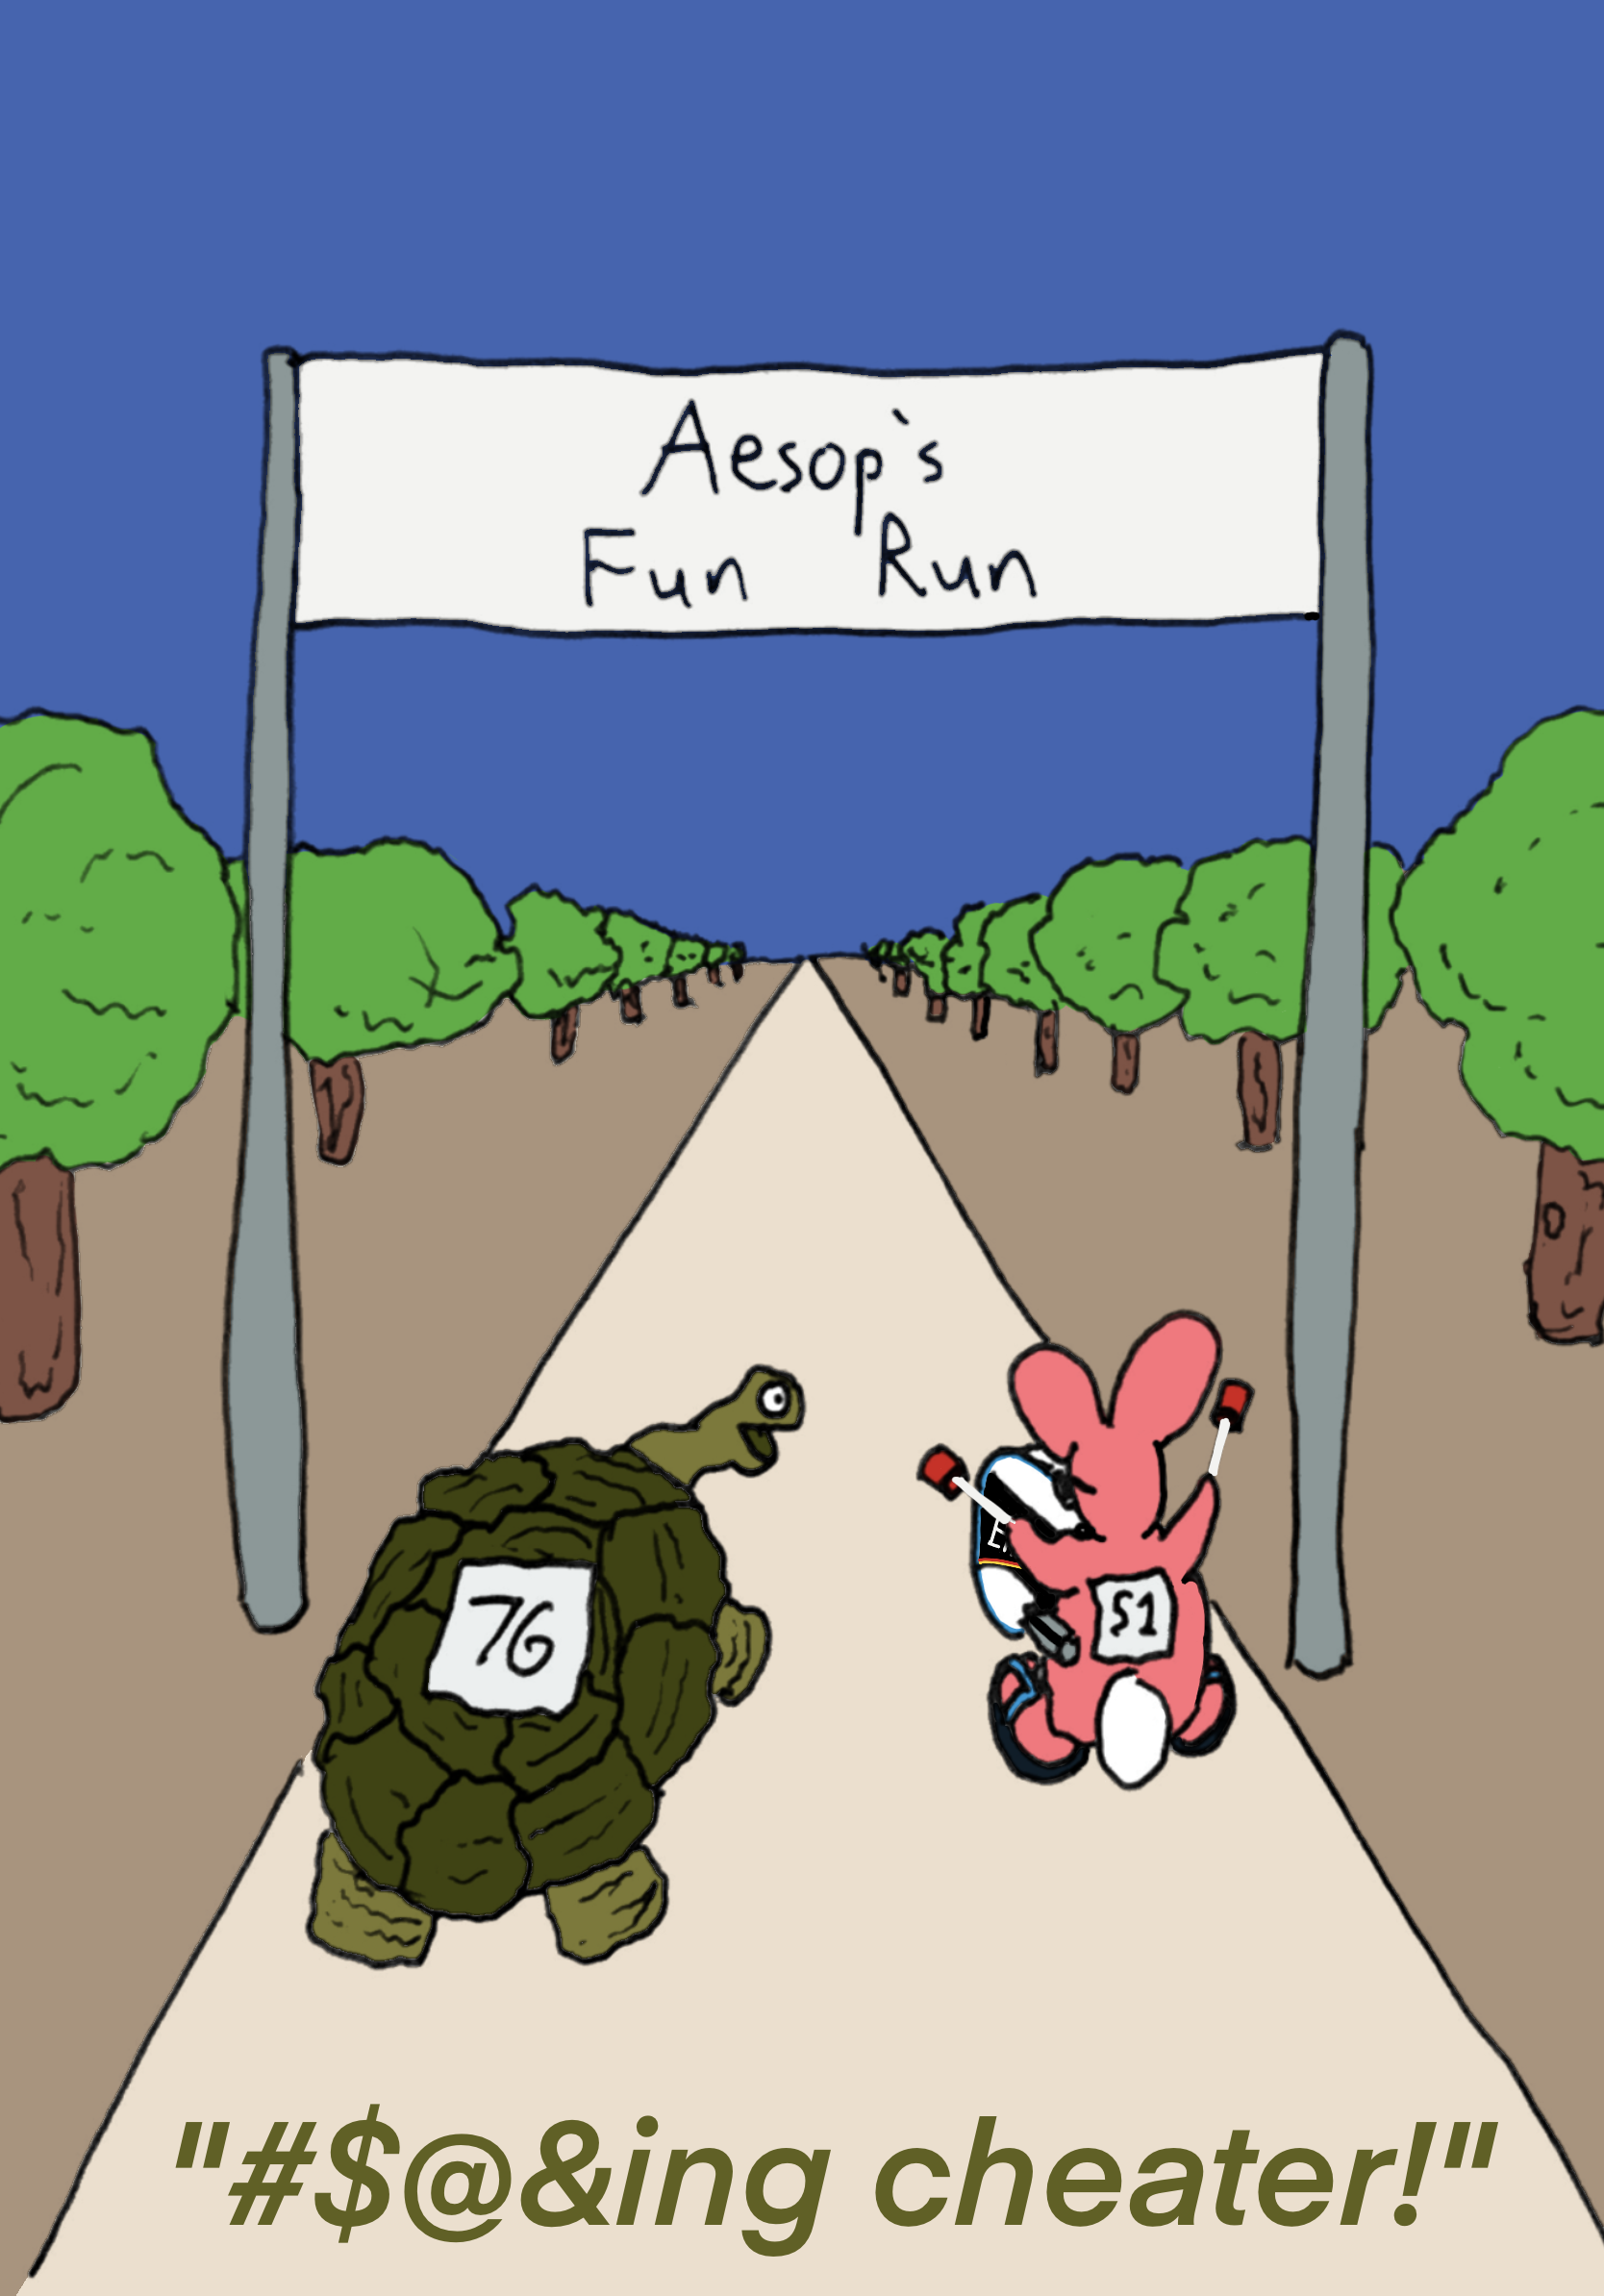 Two characters on a path, soon to pass under a sign saying "Aesop's Fun Run". On the left: A tortoise. On the right: An energizer bunny. Caption: "#$@&ing cheater!" 